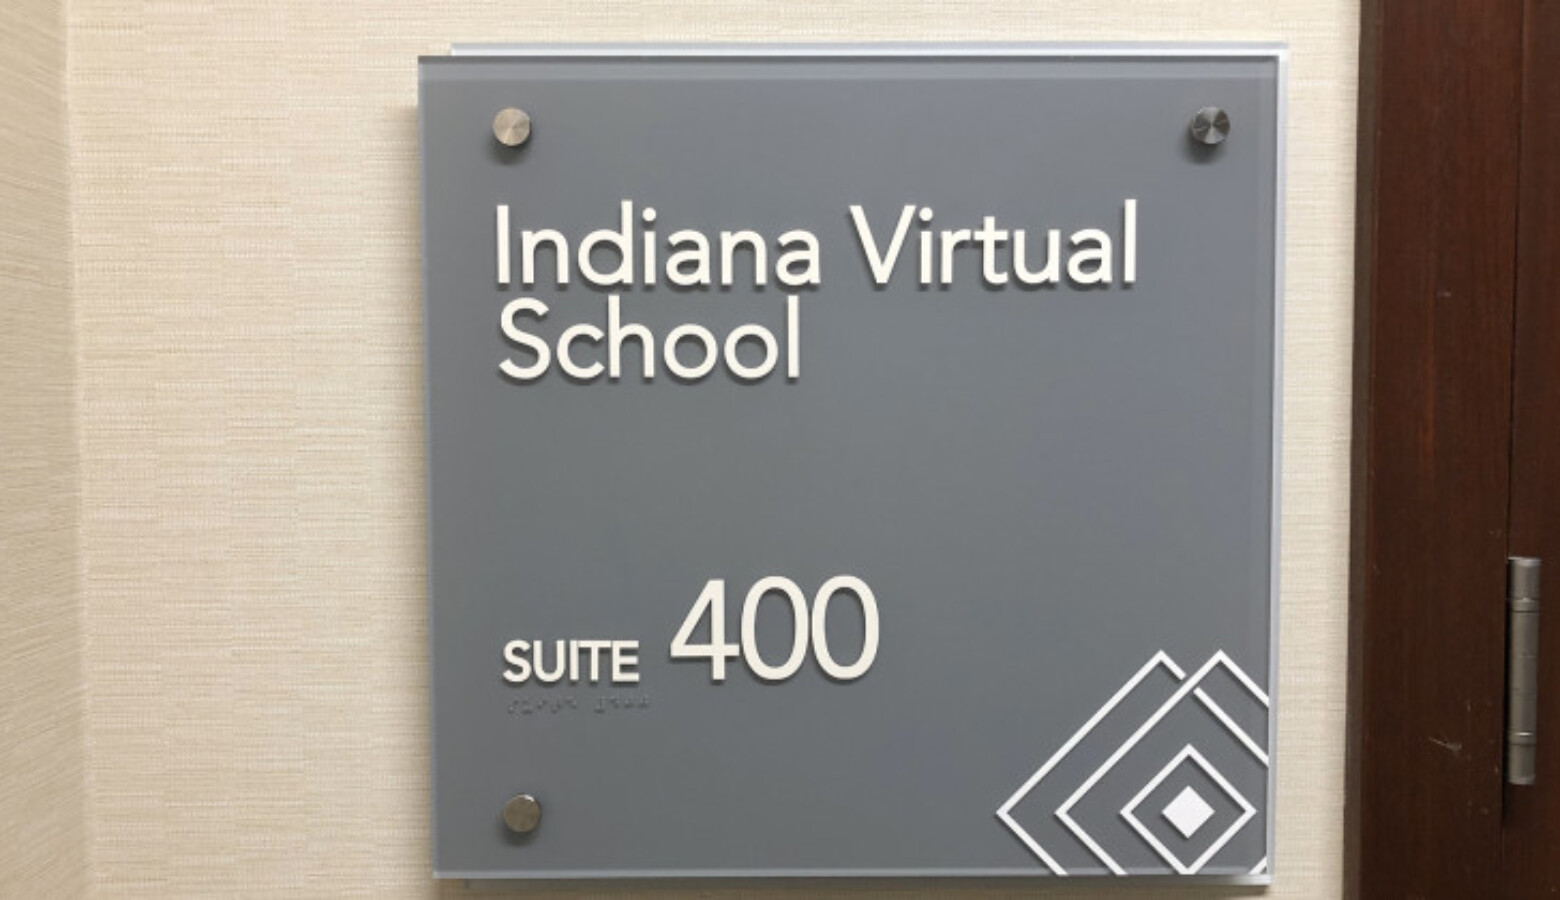 The office of the former headquarters for Indiana Virtual School and Indiana Virtual Pathways Academy was on East 96th Street in Indianapolis.